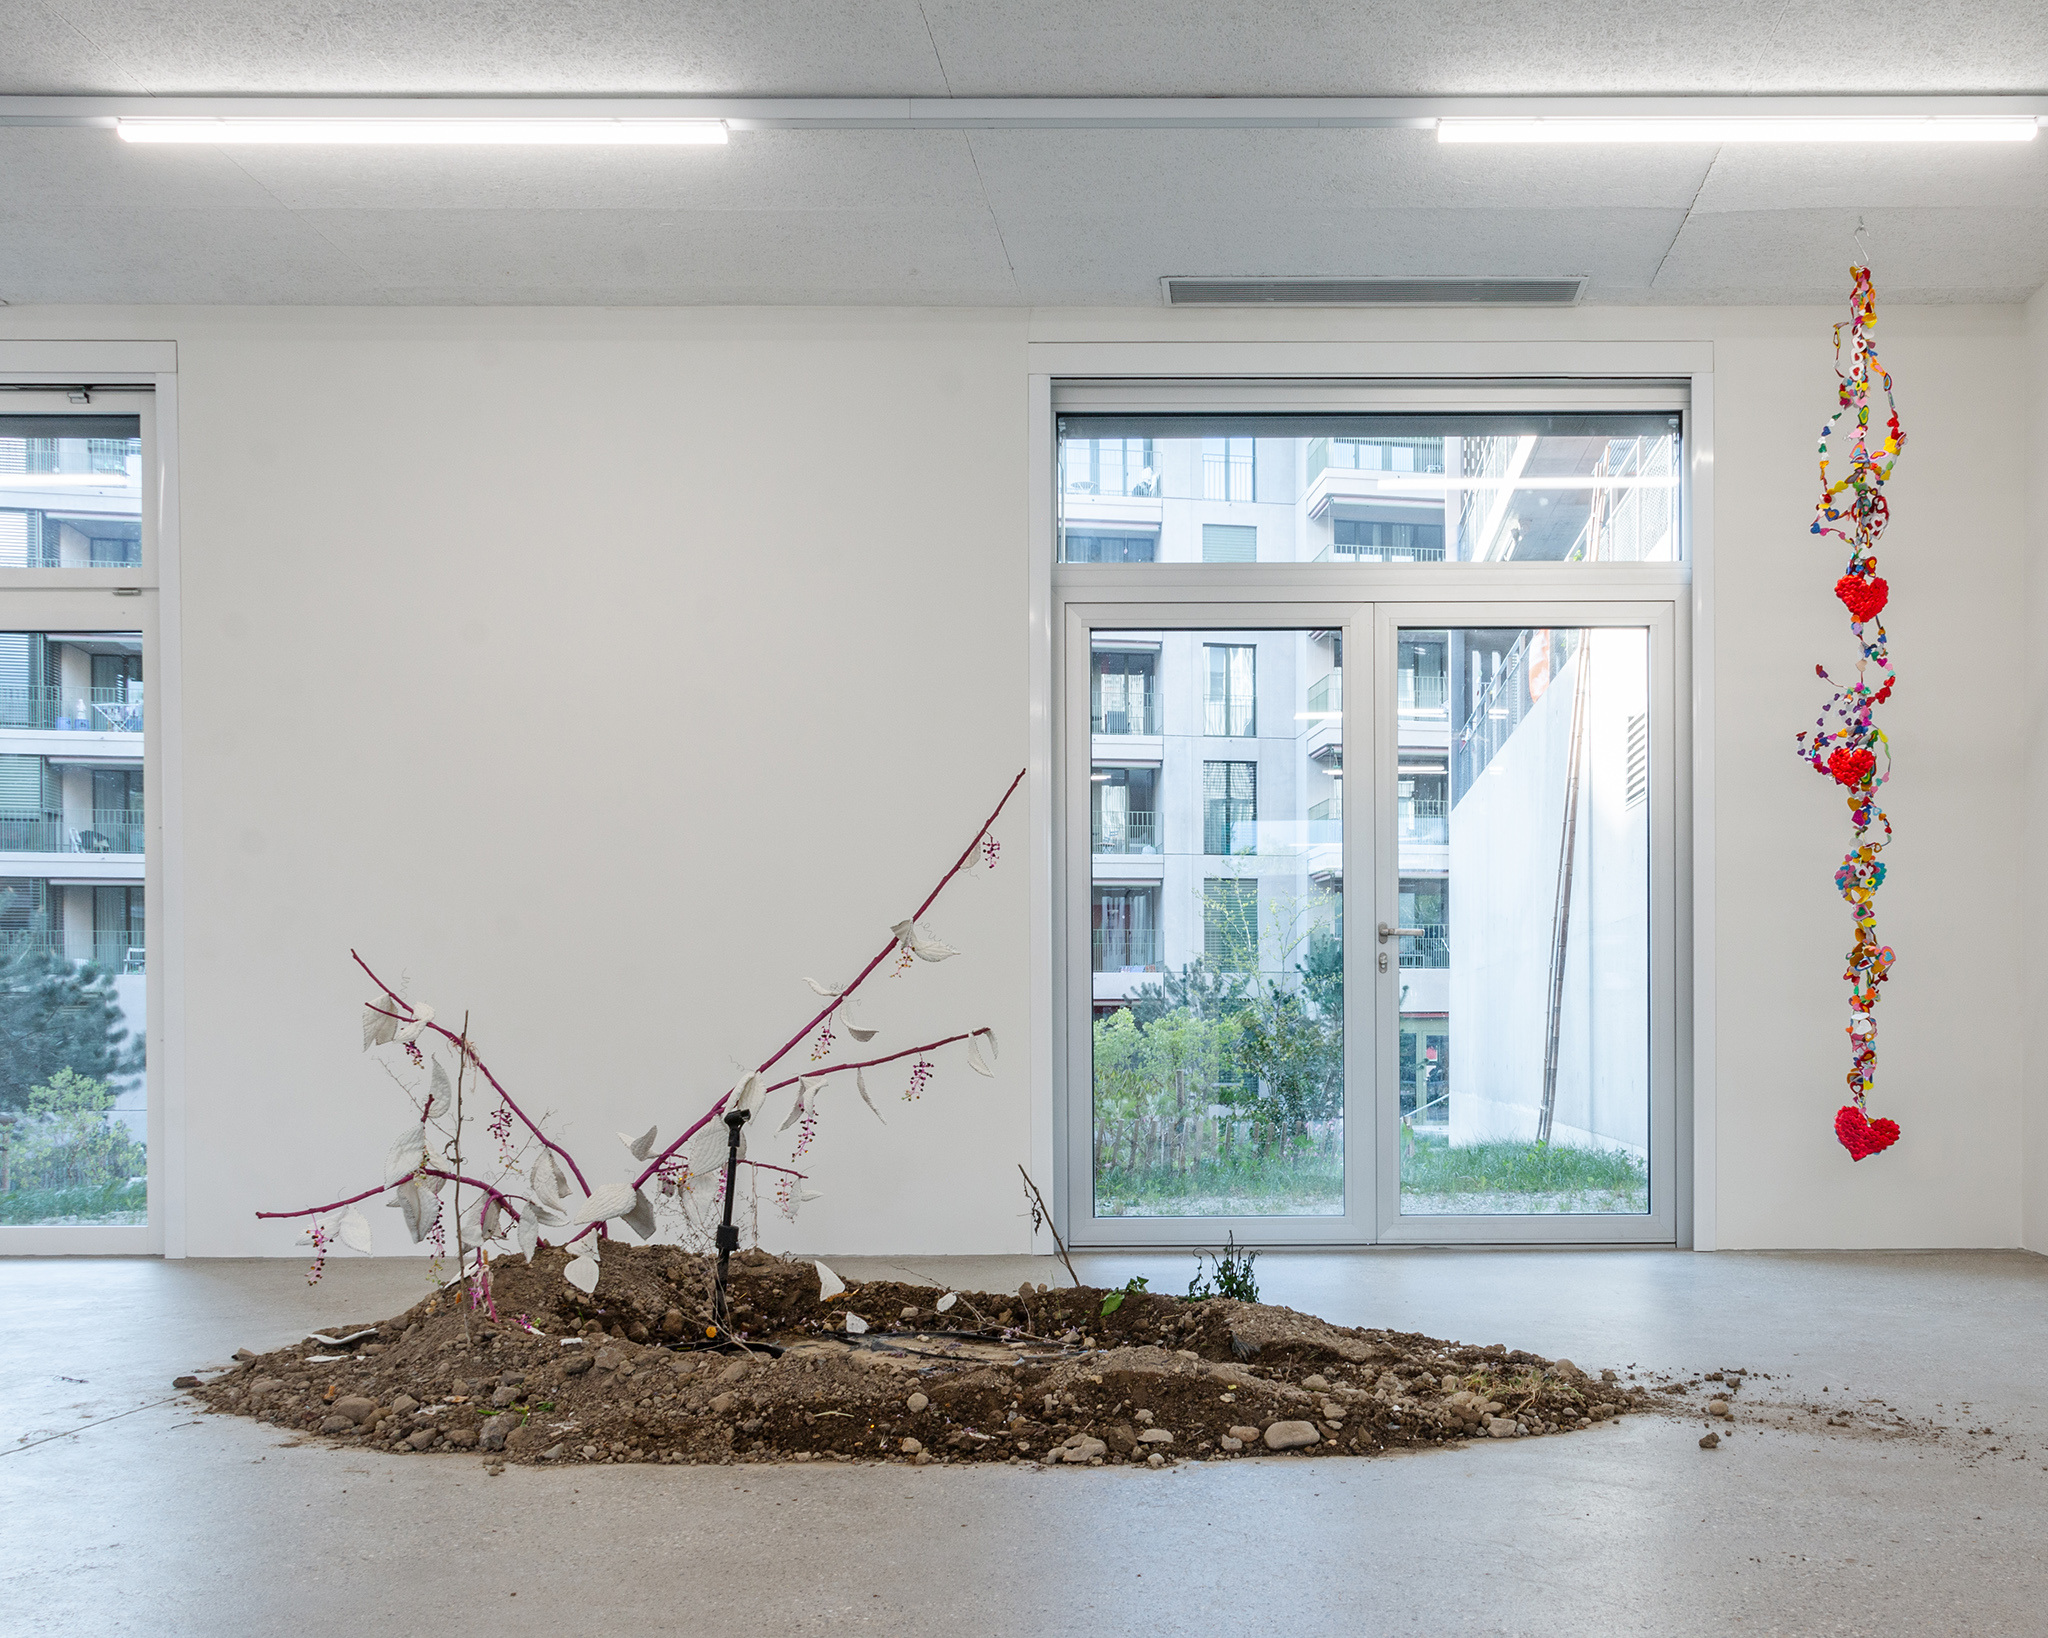 Exhibition view Our Labor, Our Passion, Our Love; Juri Bizzotto, Phytolacca Vol. 1, 2024, installation and performance, branches, beads, fabric, microphone, CALM Centre d'Art La Meute, 2024 / Photo: Théo Duﬂoo / Courtesy of the artistex.